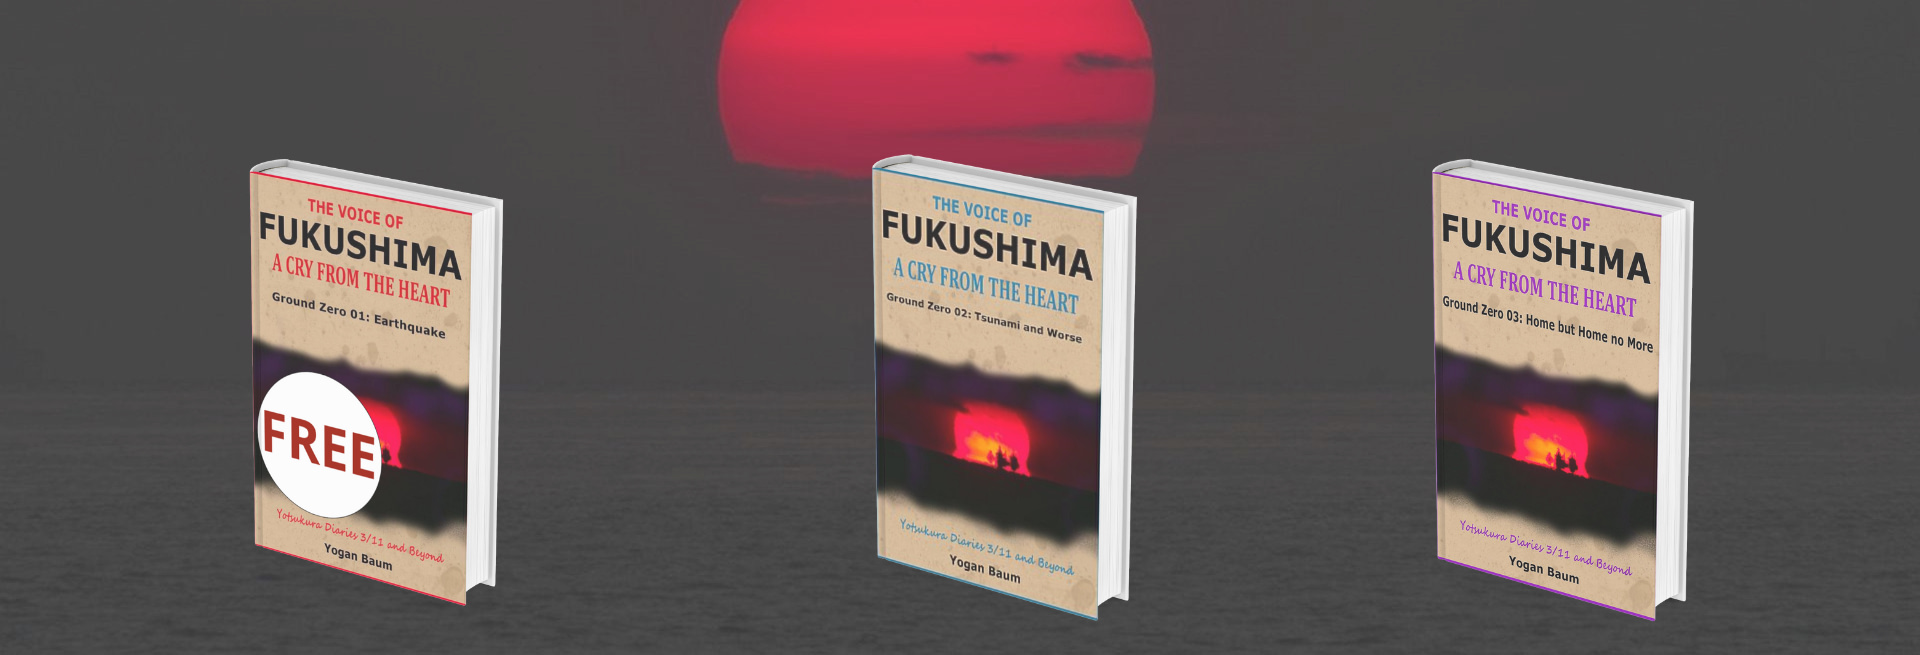 Covers of The Voice of Fukushima book series